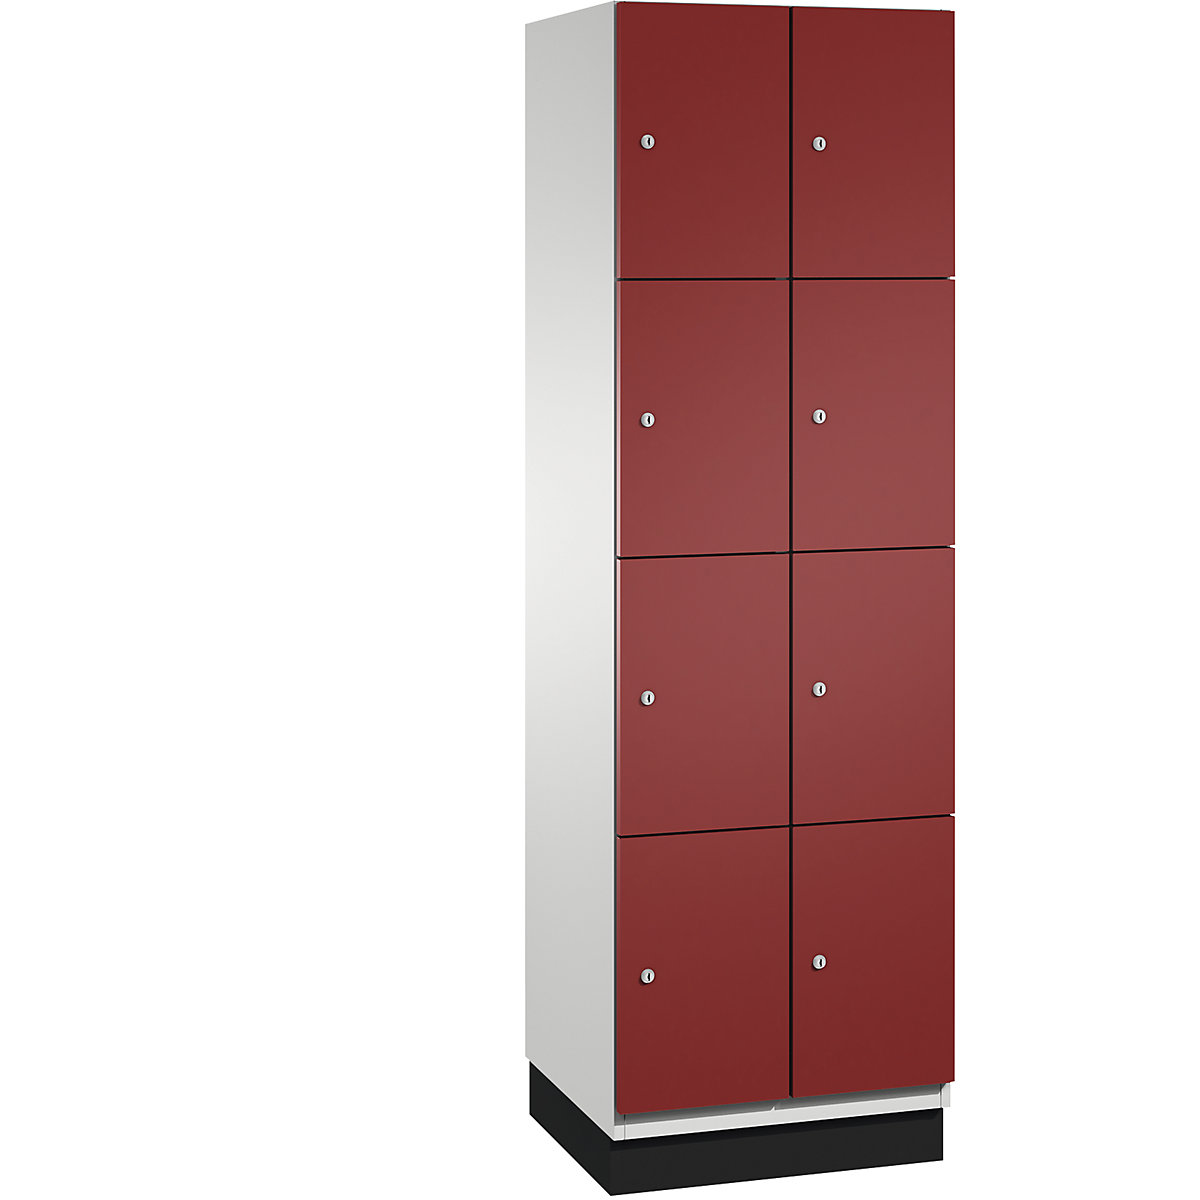 CAMBIO compartment locker with sheet steel doors – C+P, 8 compartments, width 600 mm, body light grey / door ruby red-12